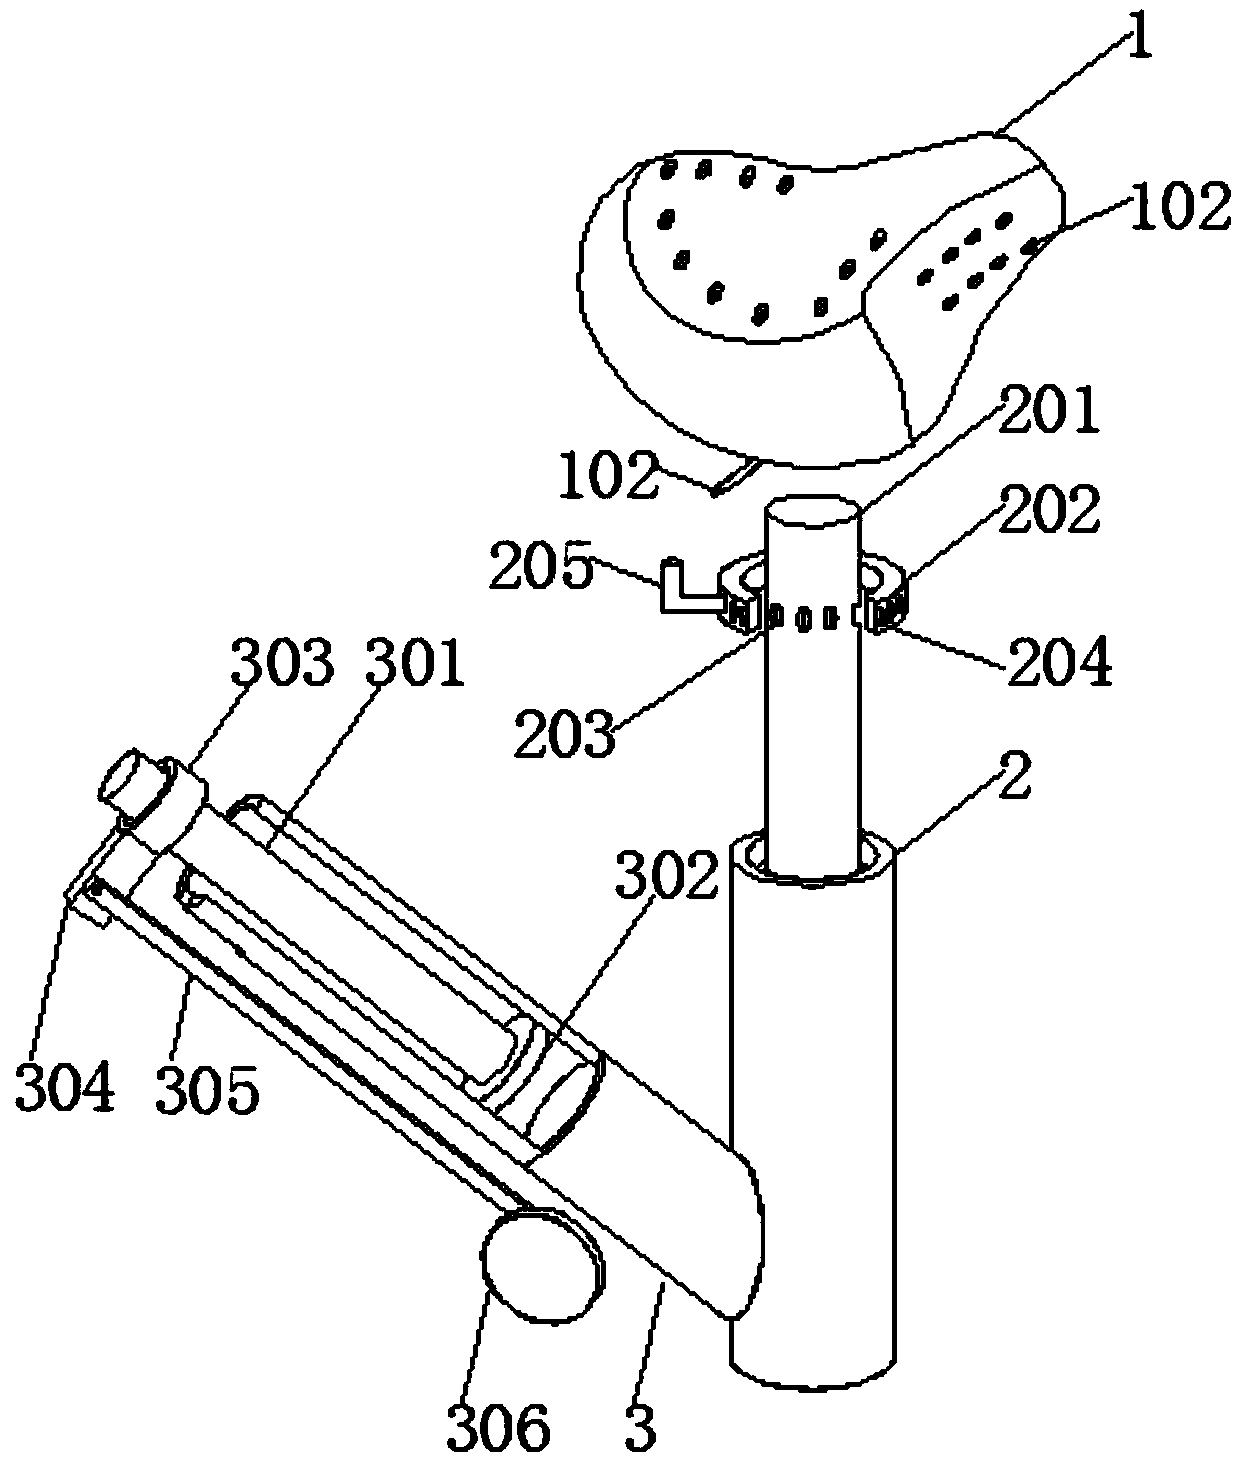 Bicycle saddle being continuously kept in a dry state